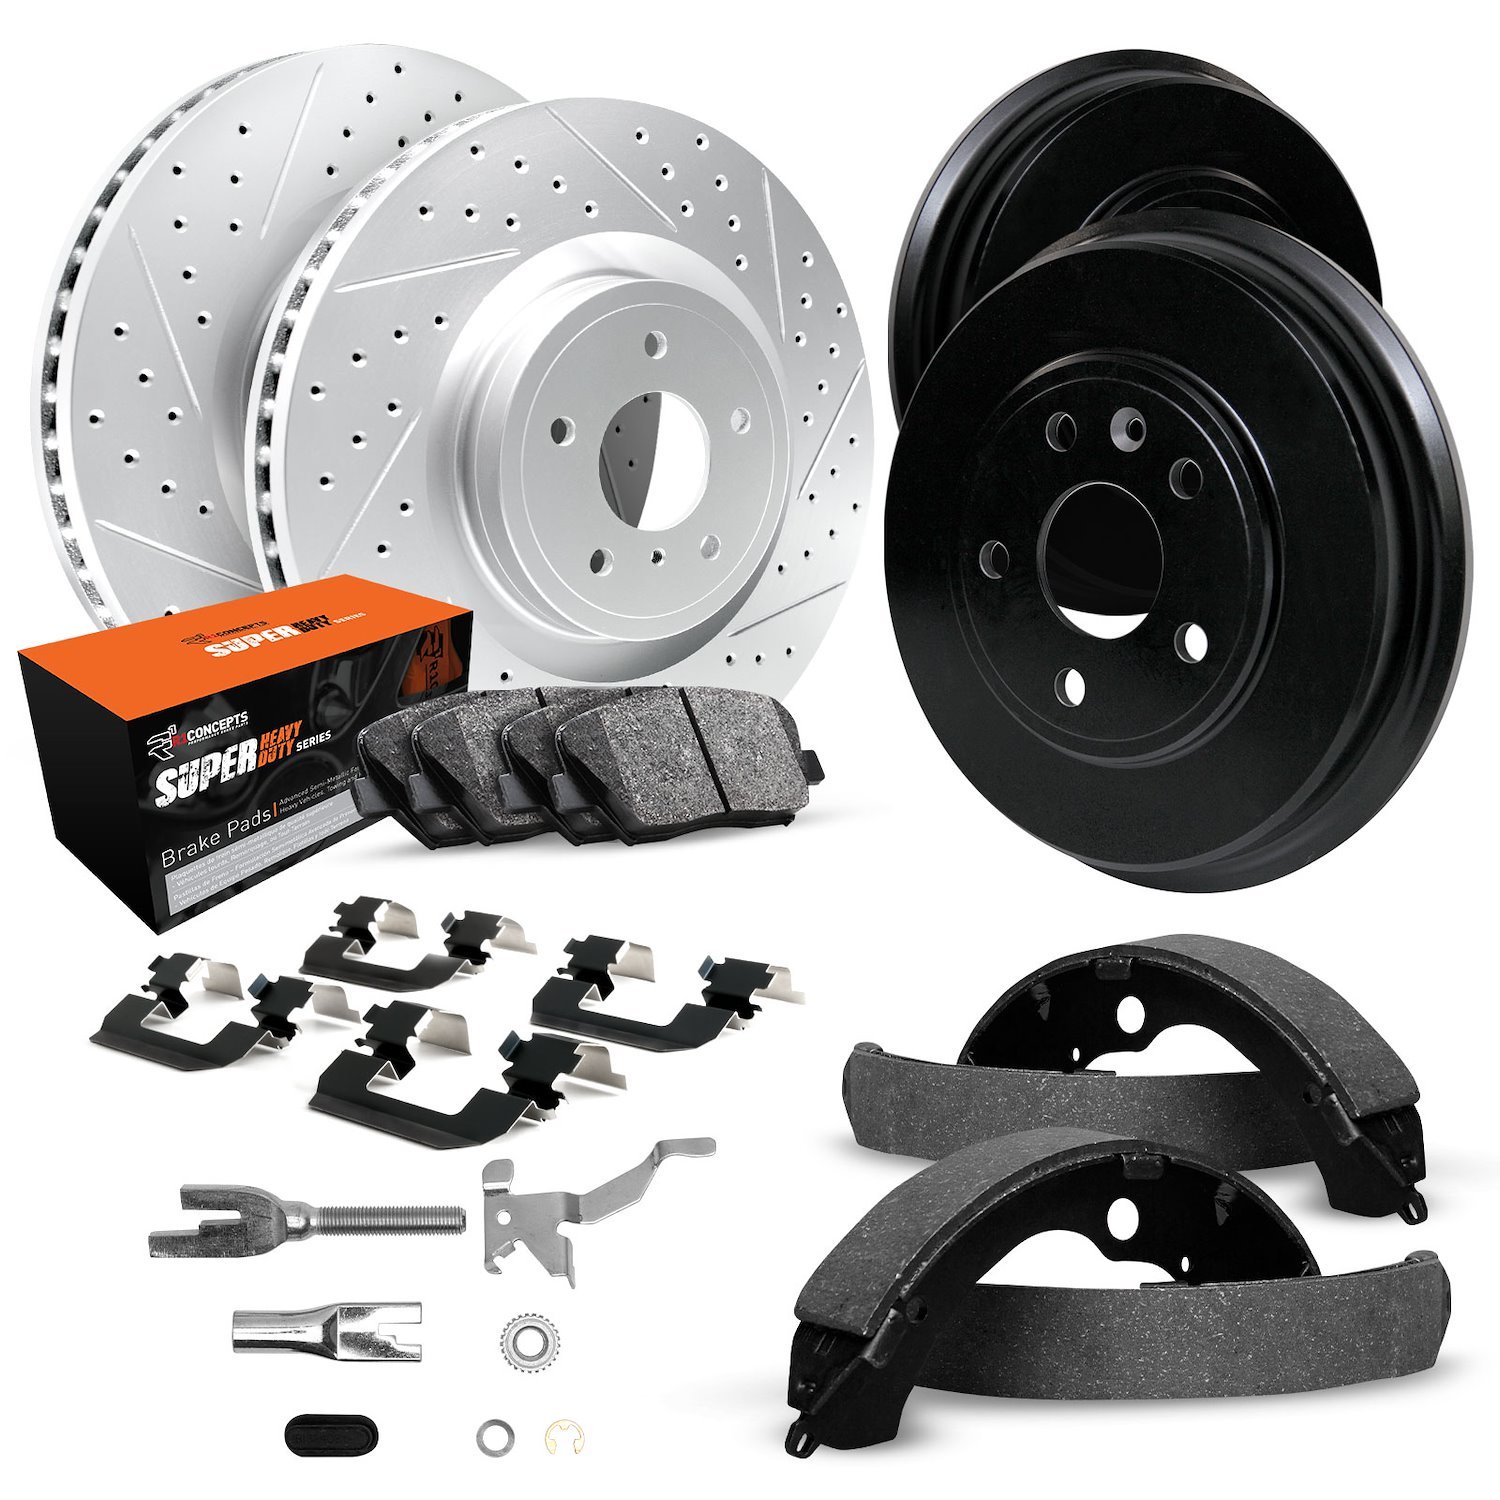 GEO-Carbon Drilled/Slotted Rotors/Drums w/Super-Duty Pads/Shoes/Hardware/Adjusters, 1992-2000 GM, Position: Front/Rear